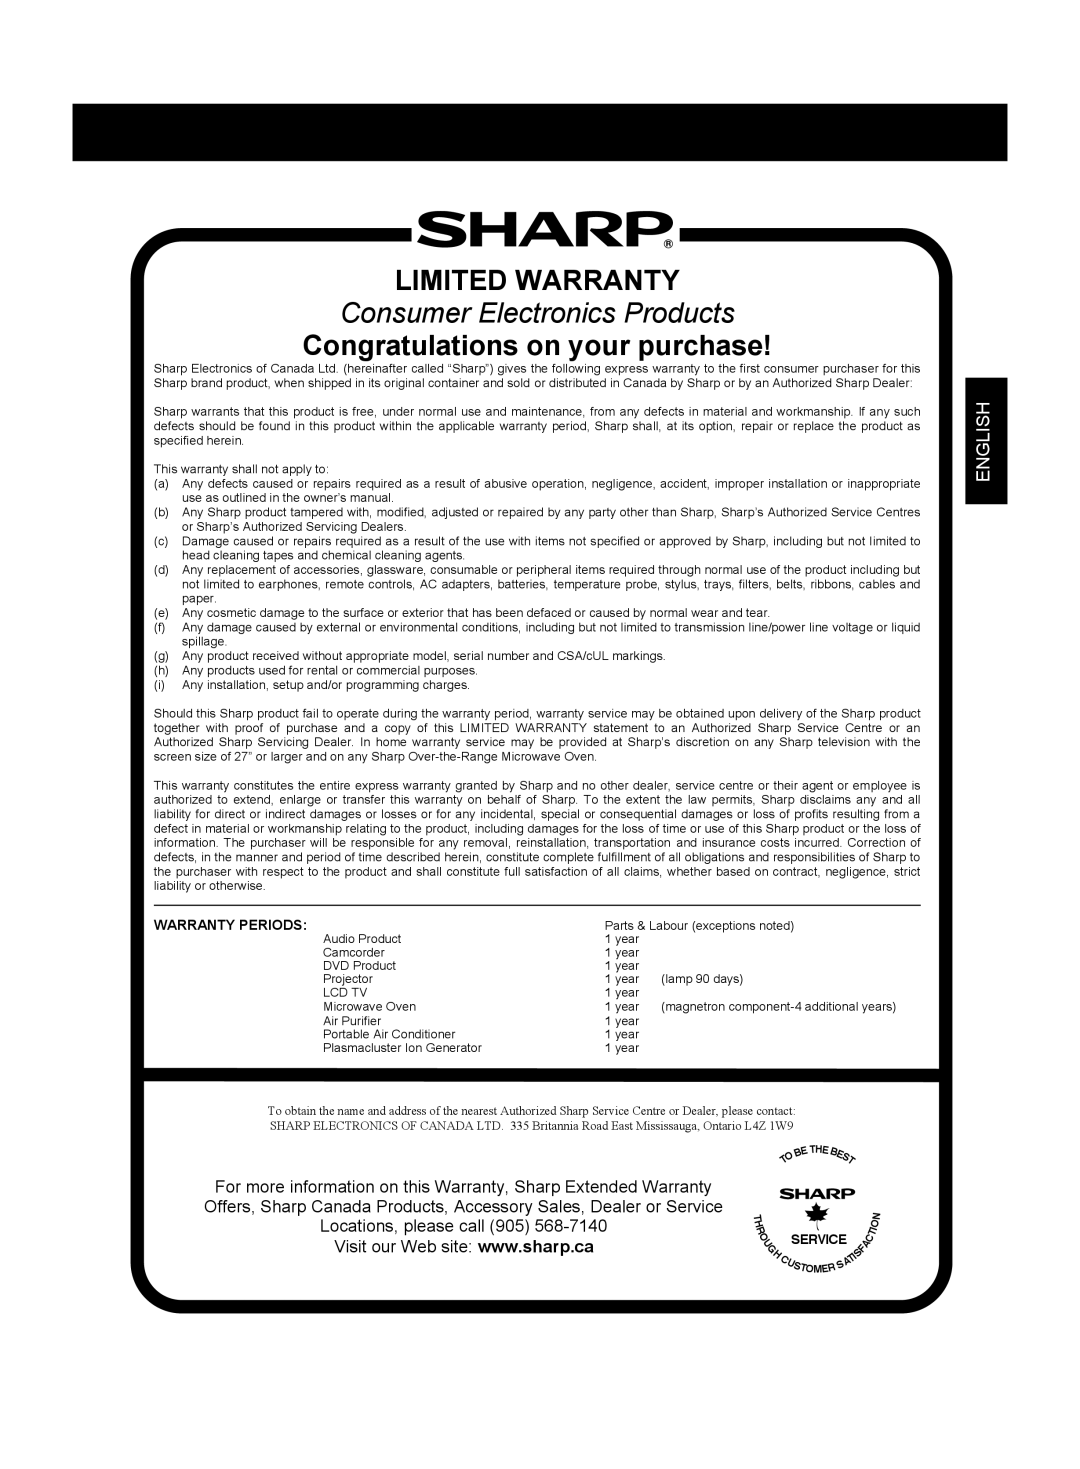 Sharp KC-860U Limited Warranty, Consumer Electronics Products, Congratulations on your purchase, English, Service 